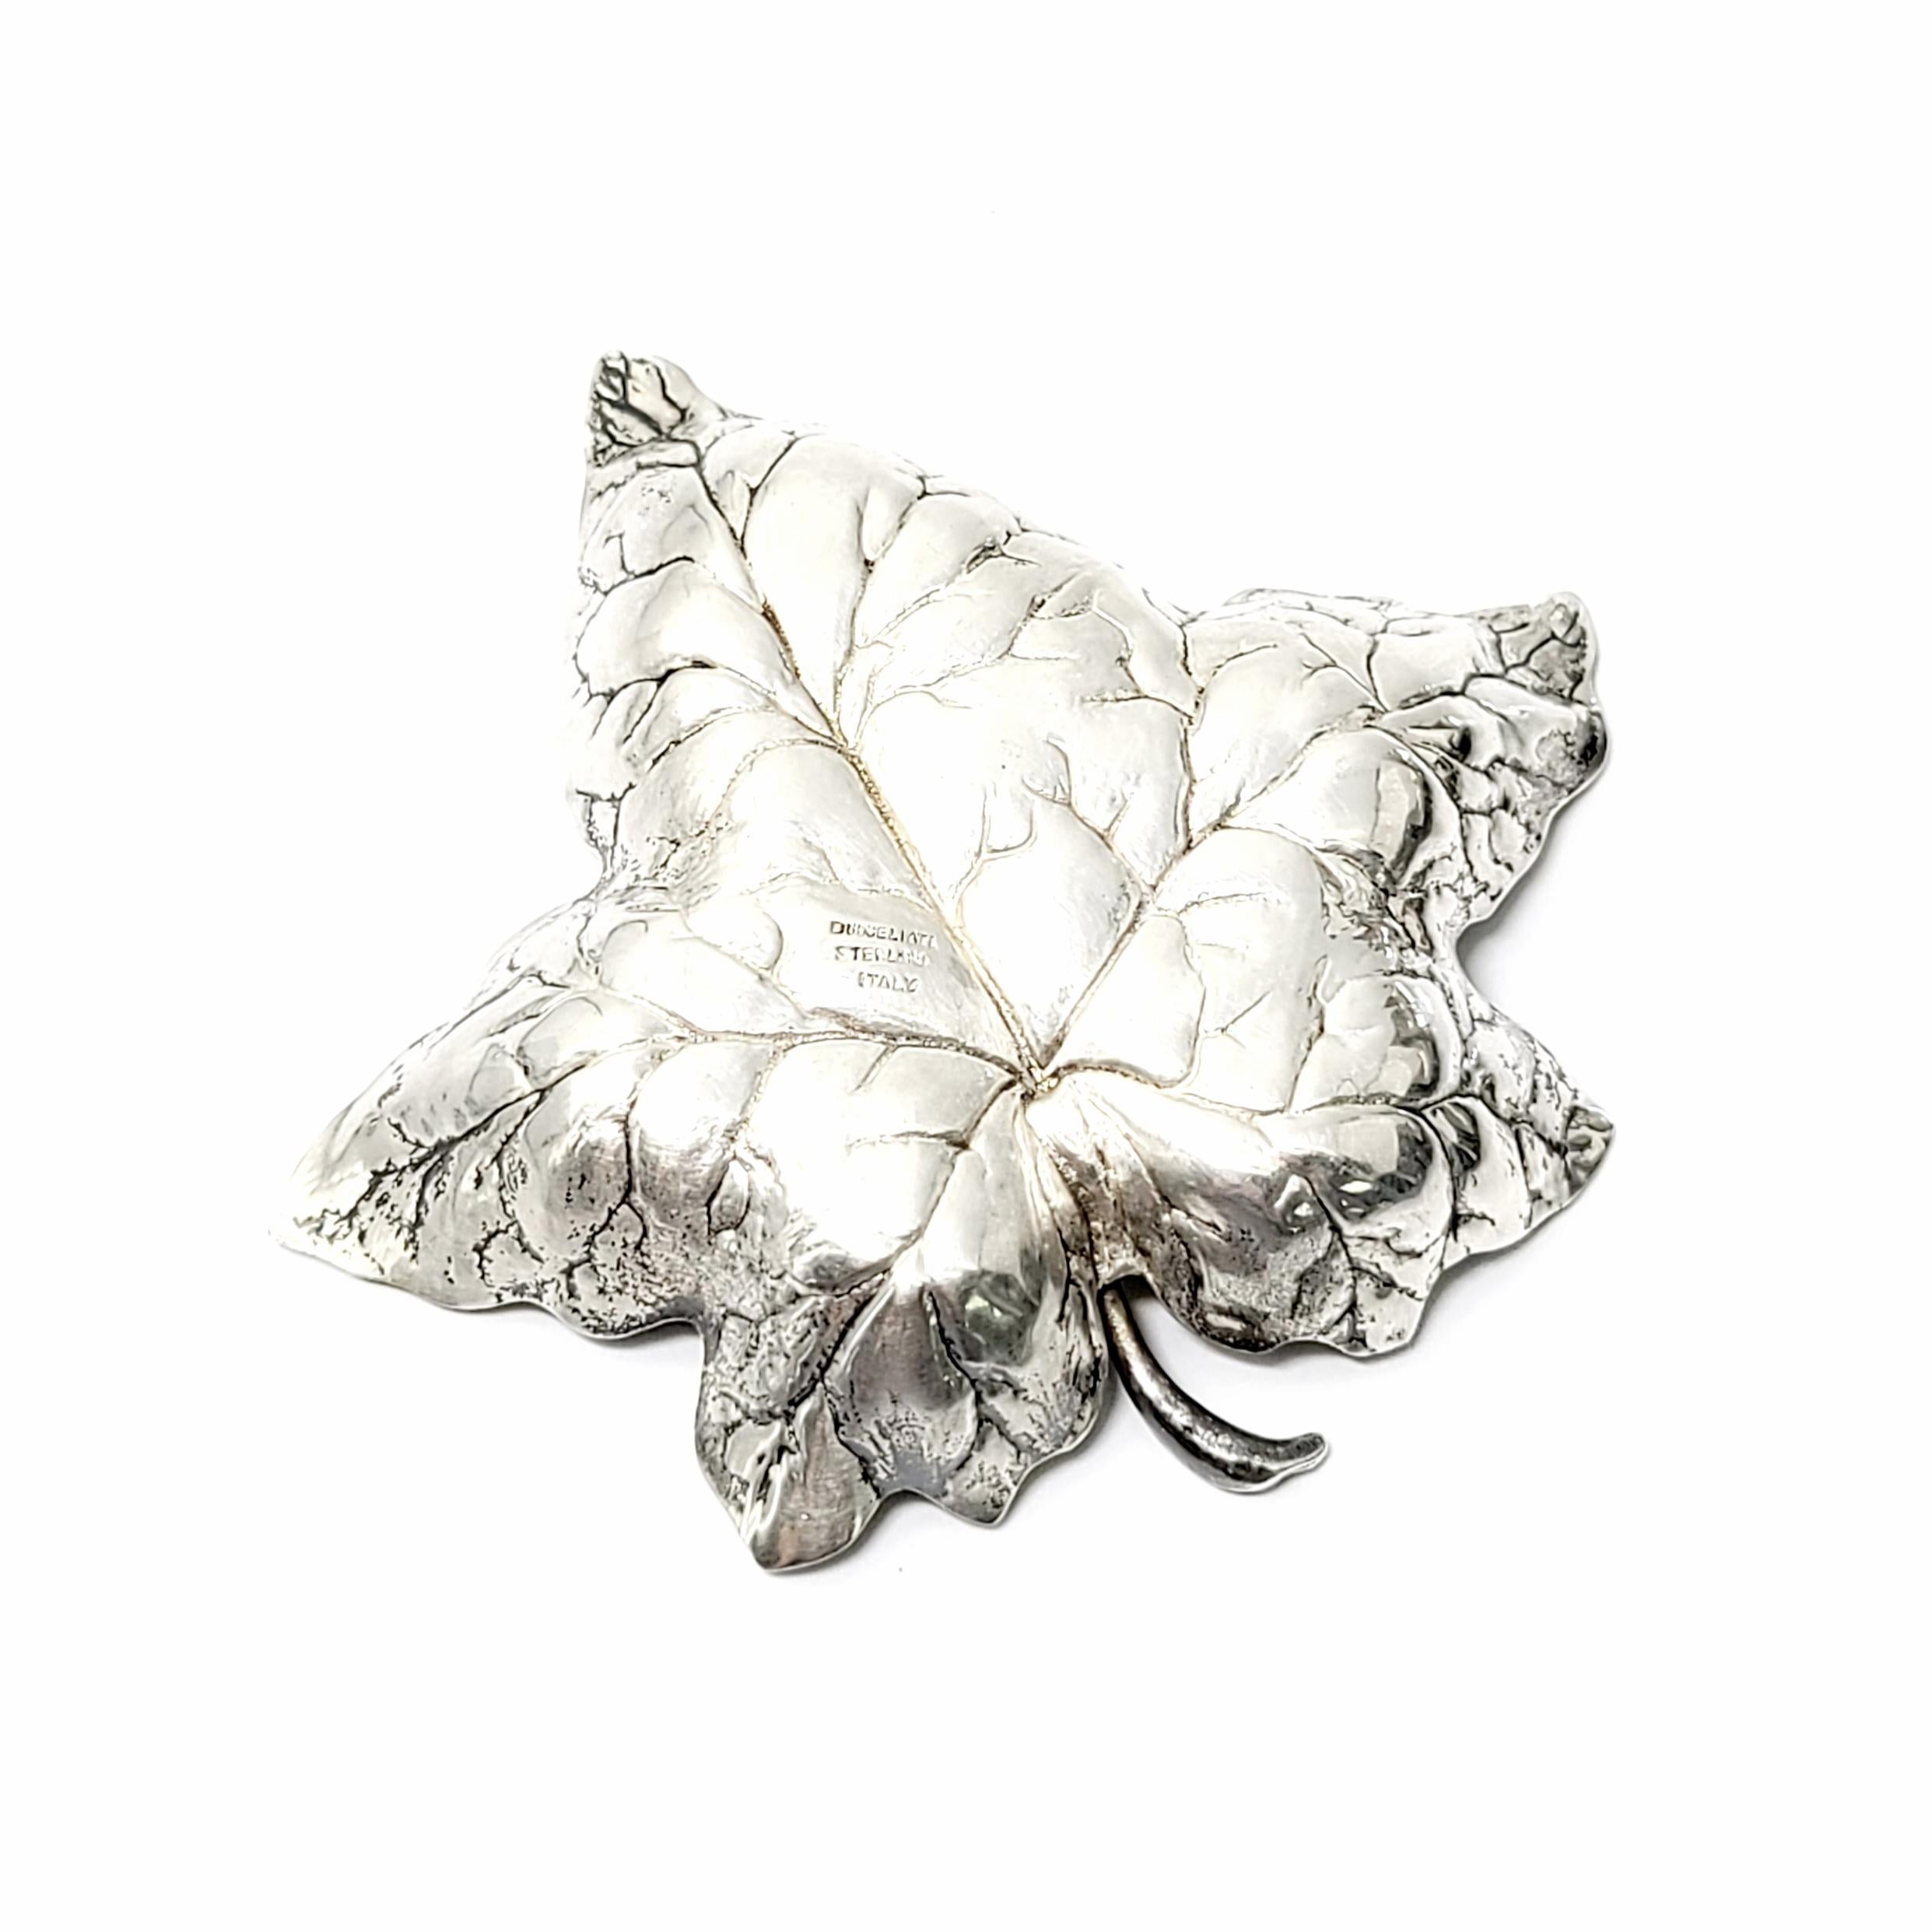 Vintage sterling silver leaf dish by Gianmaria Buccellati.

Highly detailed small leaf dish by one of the most prestigious jewelers in the world.

Measures approx 3 1/4